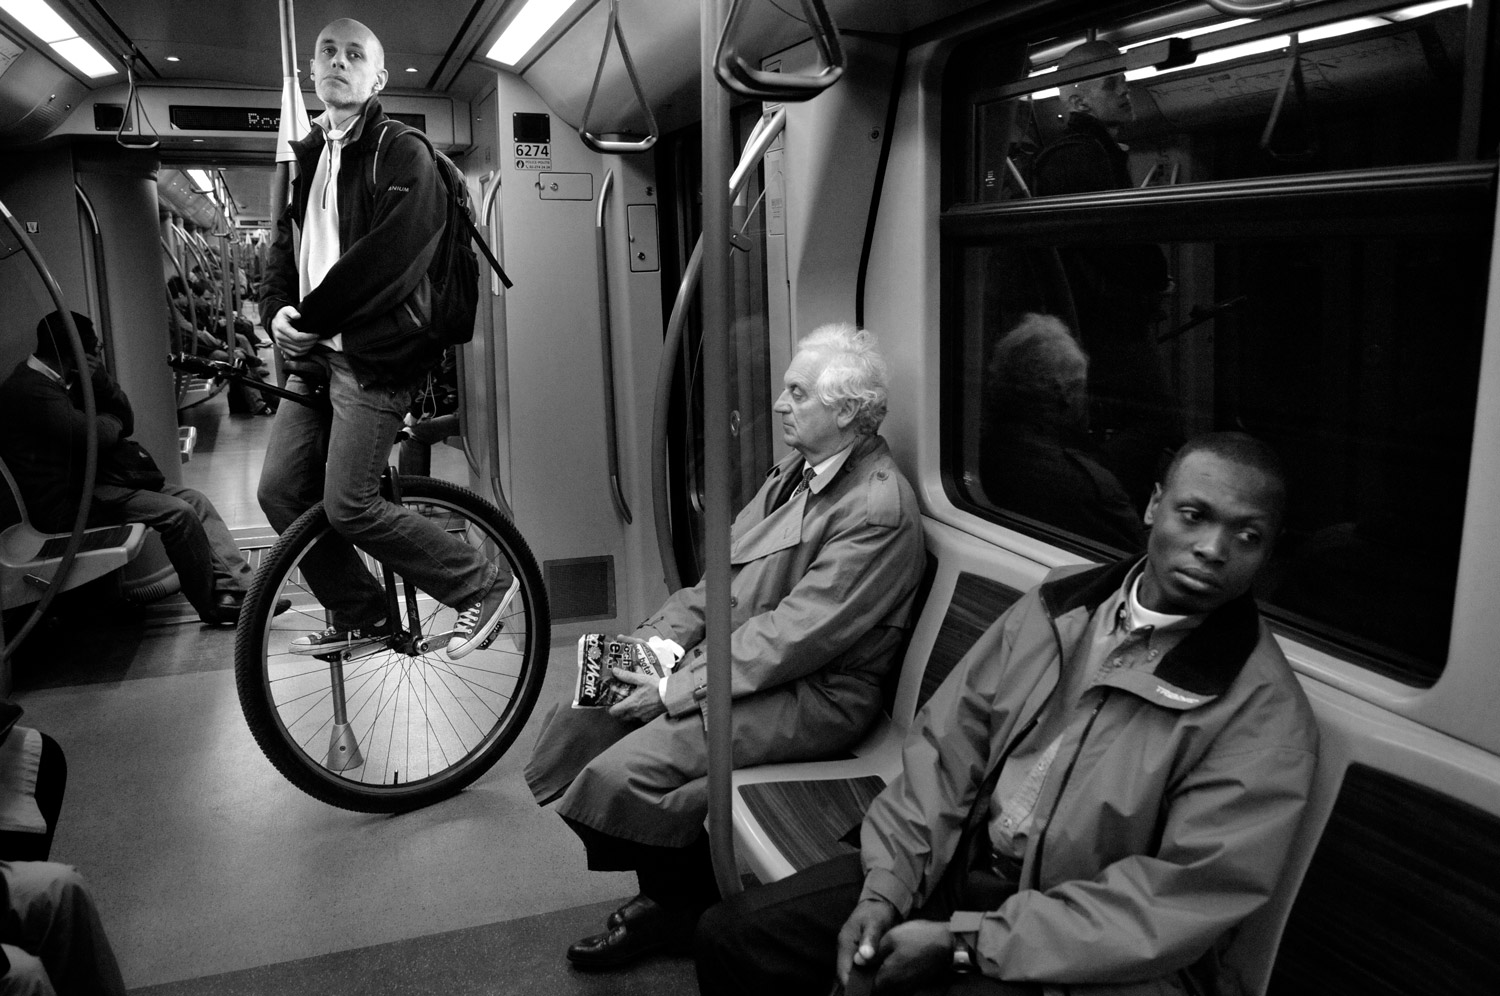 During one and a half year, I travelled with every bus, tram, and metro line at least once, from terminal to terminal.  Images and text show a cross-section of Brussels, while also  giving a brief glimpse into the lives of the) fellow passengers who cross our path every day. © Bram Penninckx